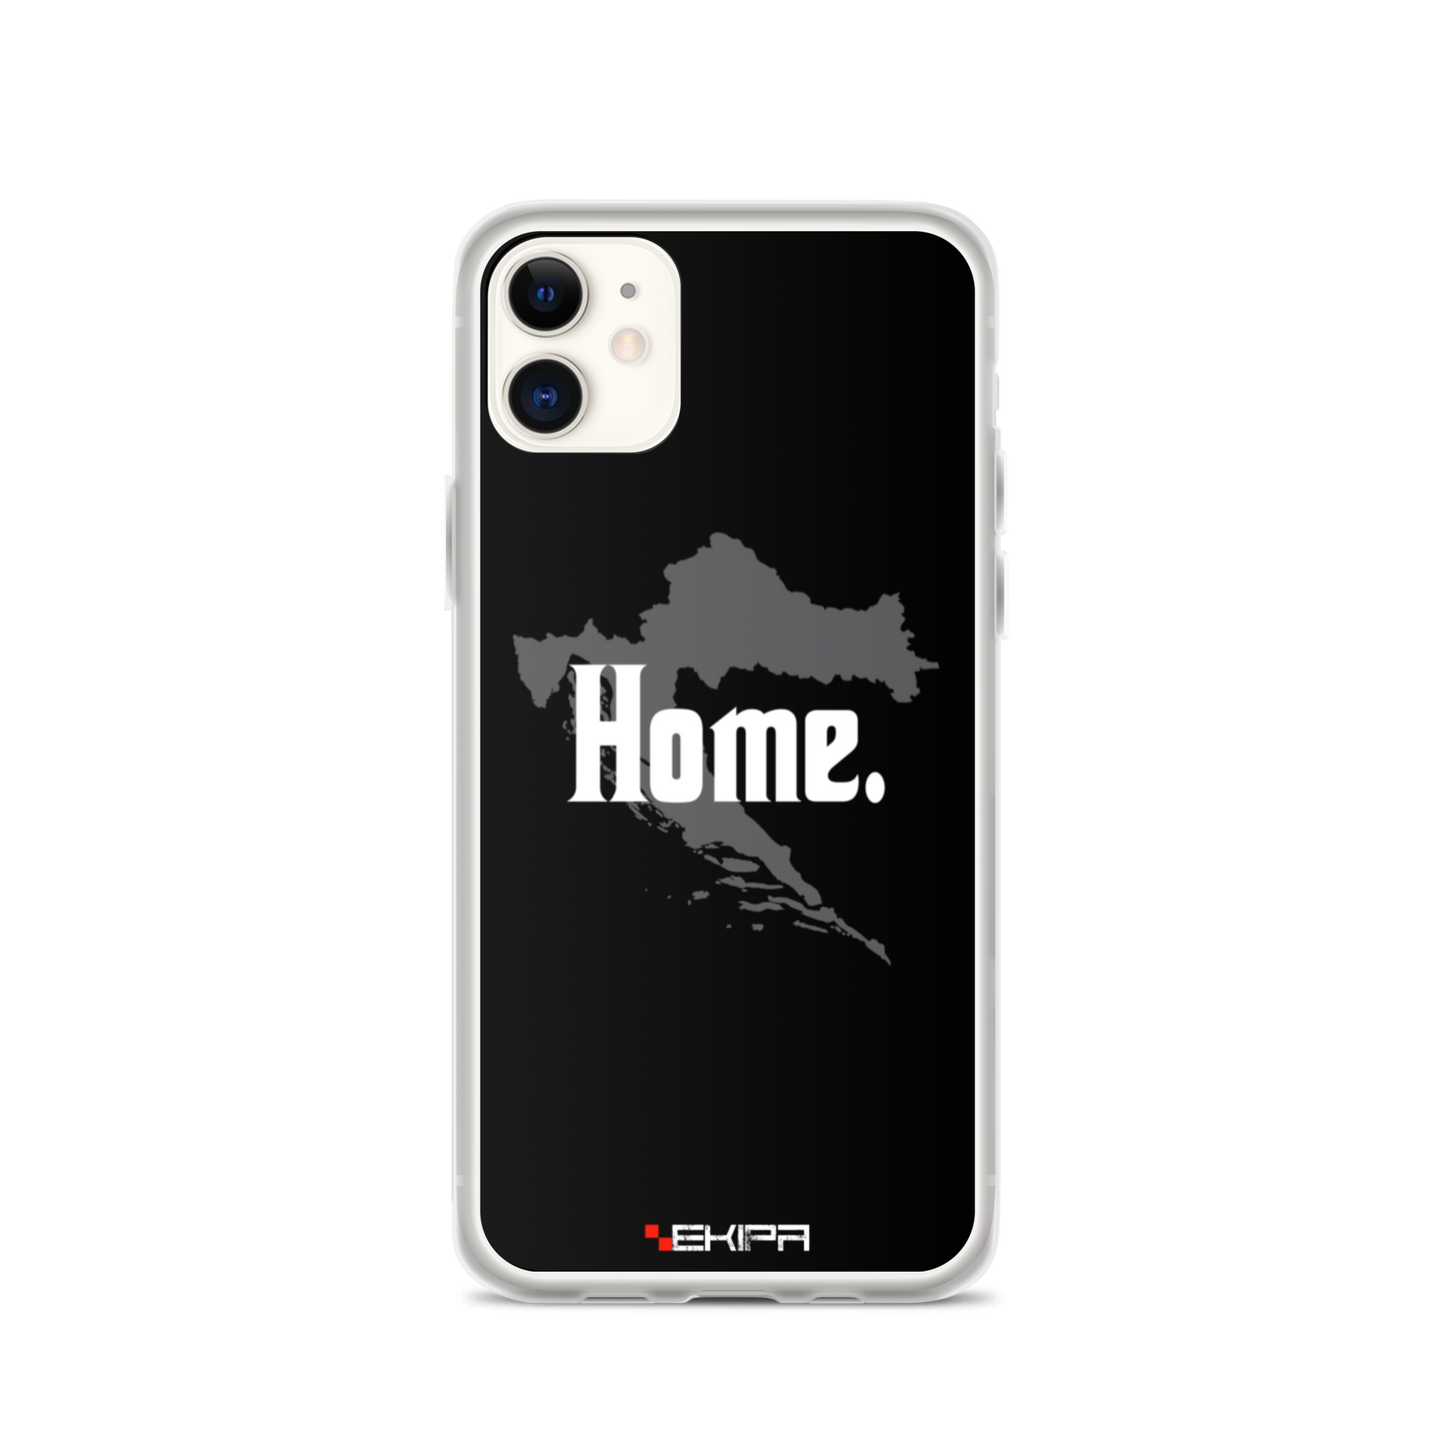 "Home" - iPhone case